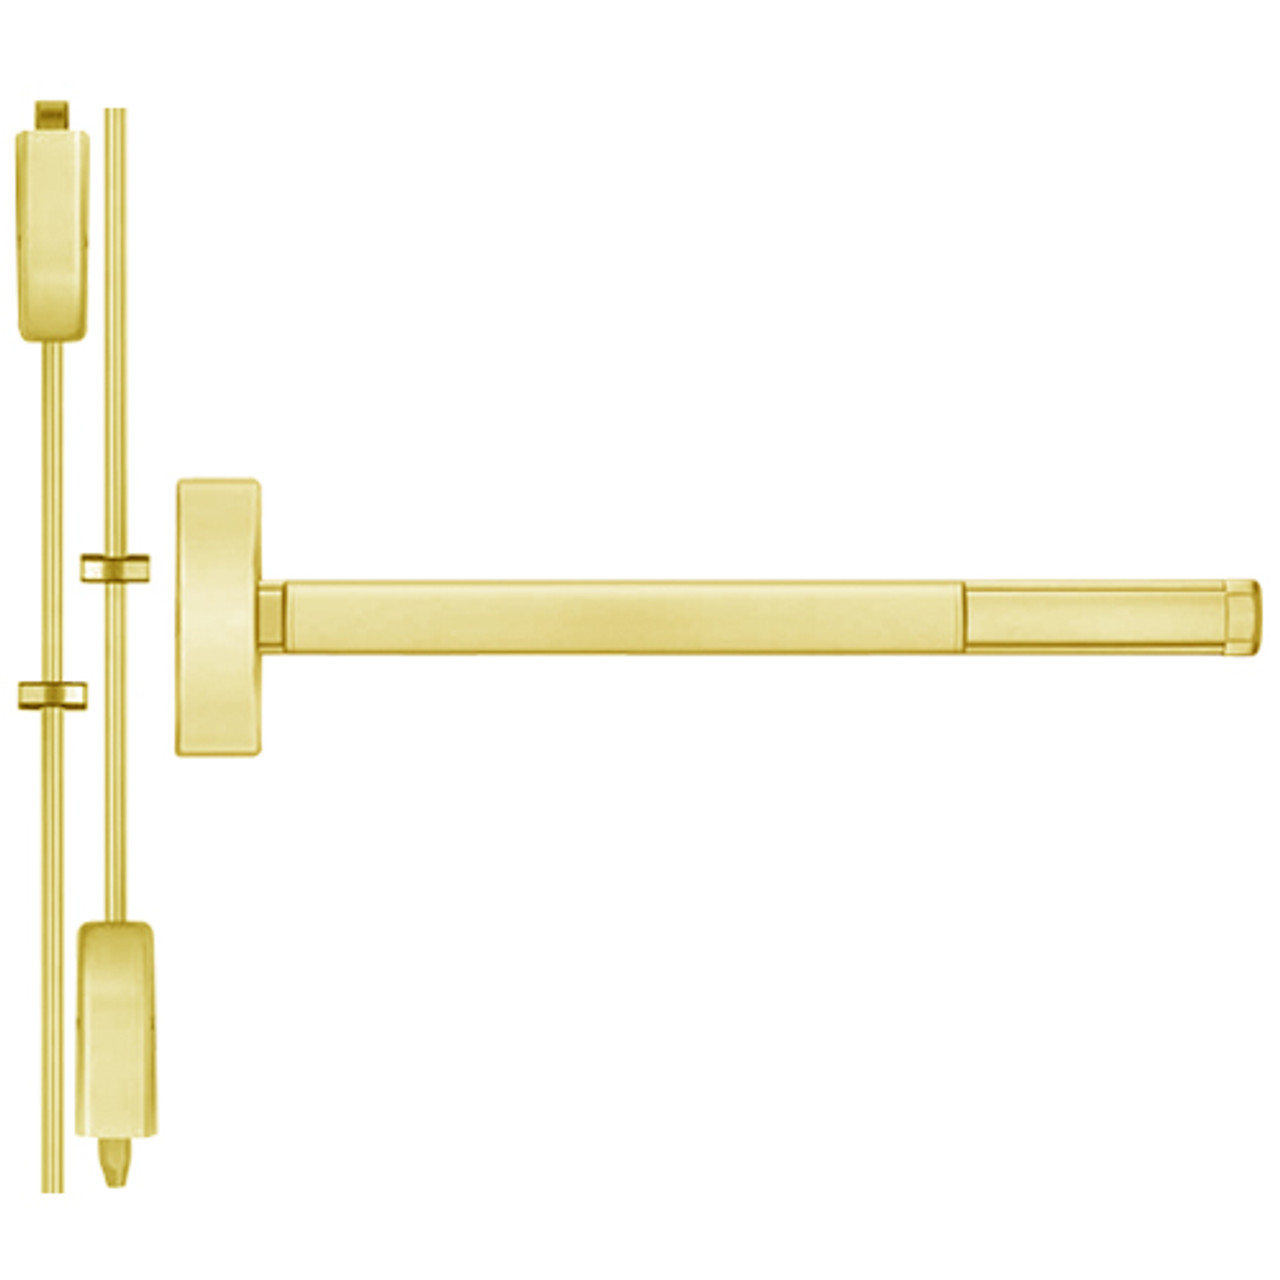 MLRFL2203-605-36 PHI 2200 Series Apex Surface Vertical Rod Device with Motorized Latch Retraction Prepped for Key Retracts Latchbolt in Bright Brass Finish